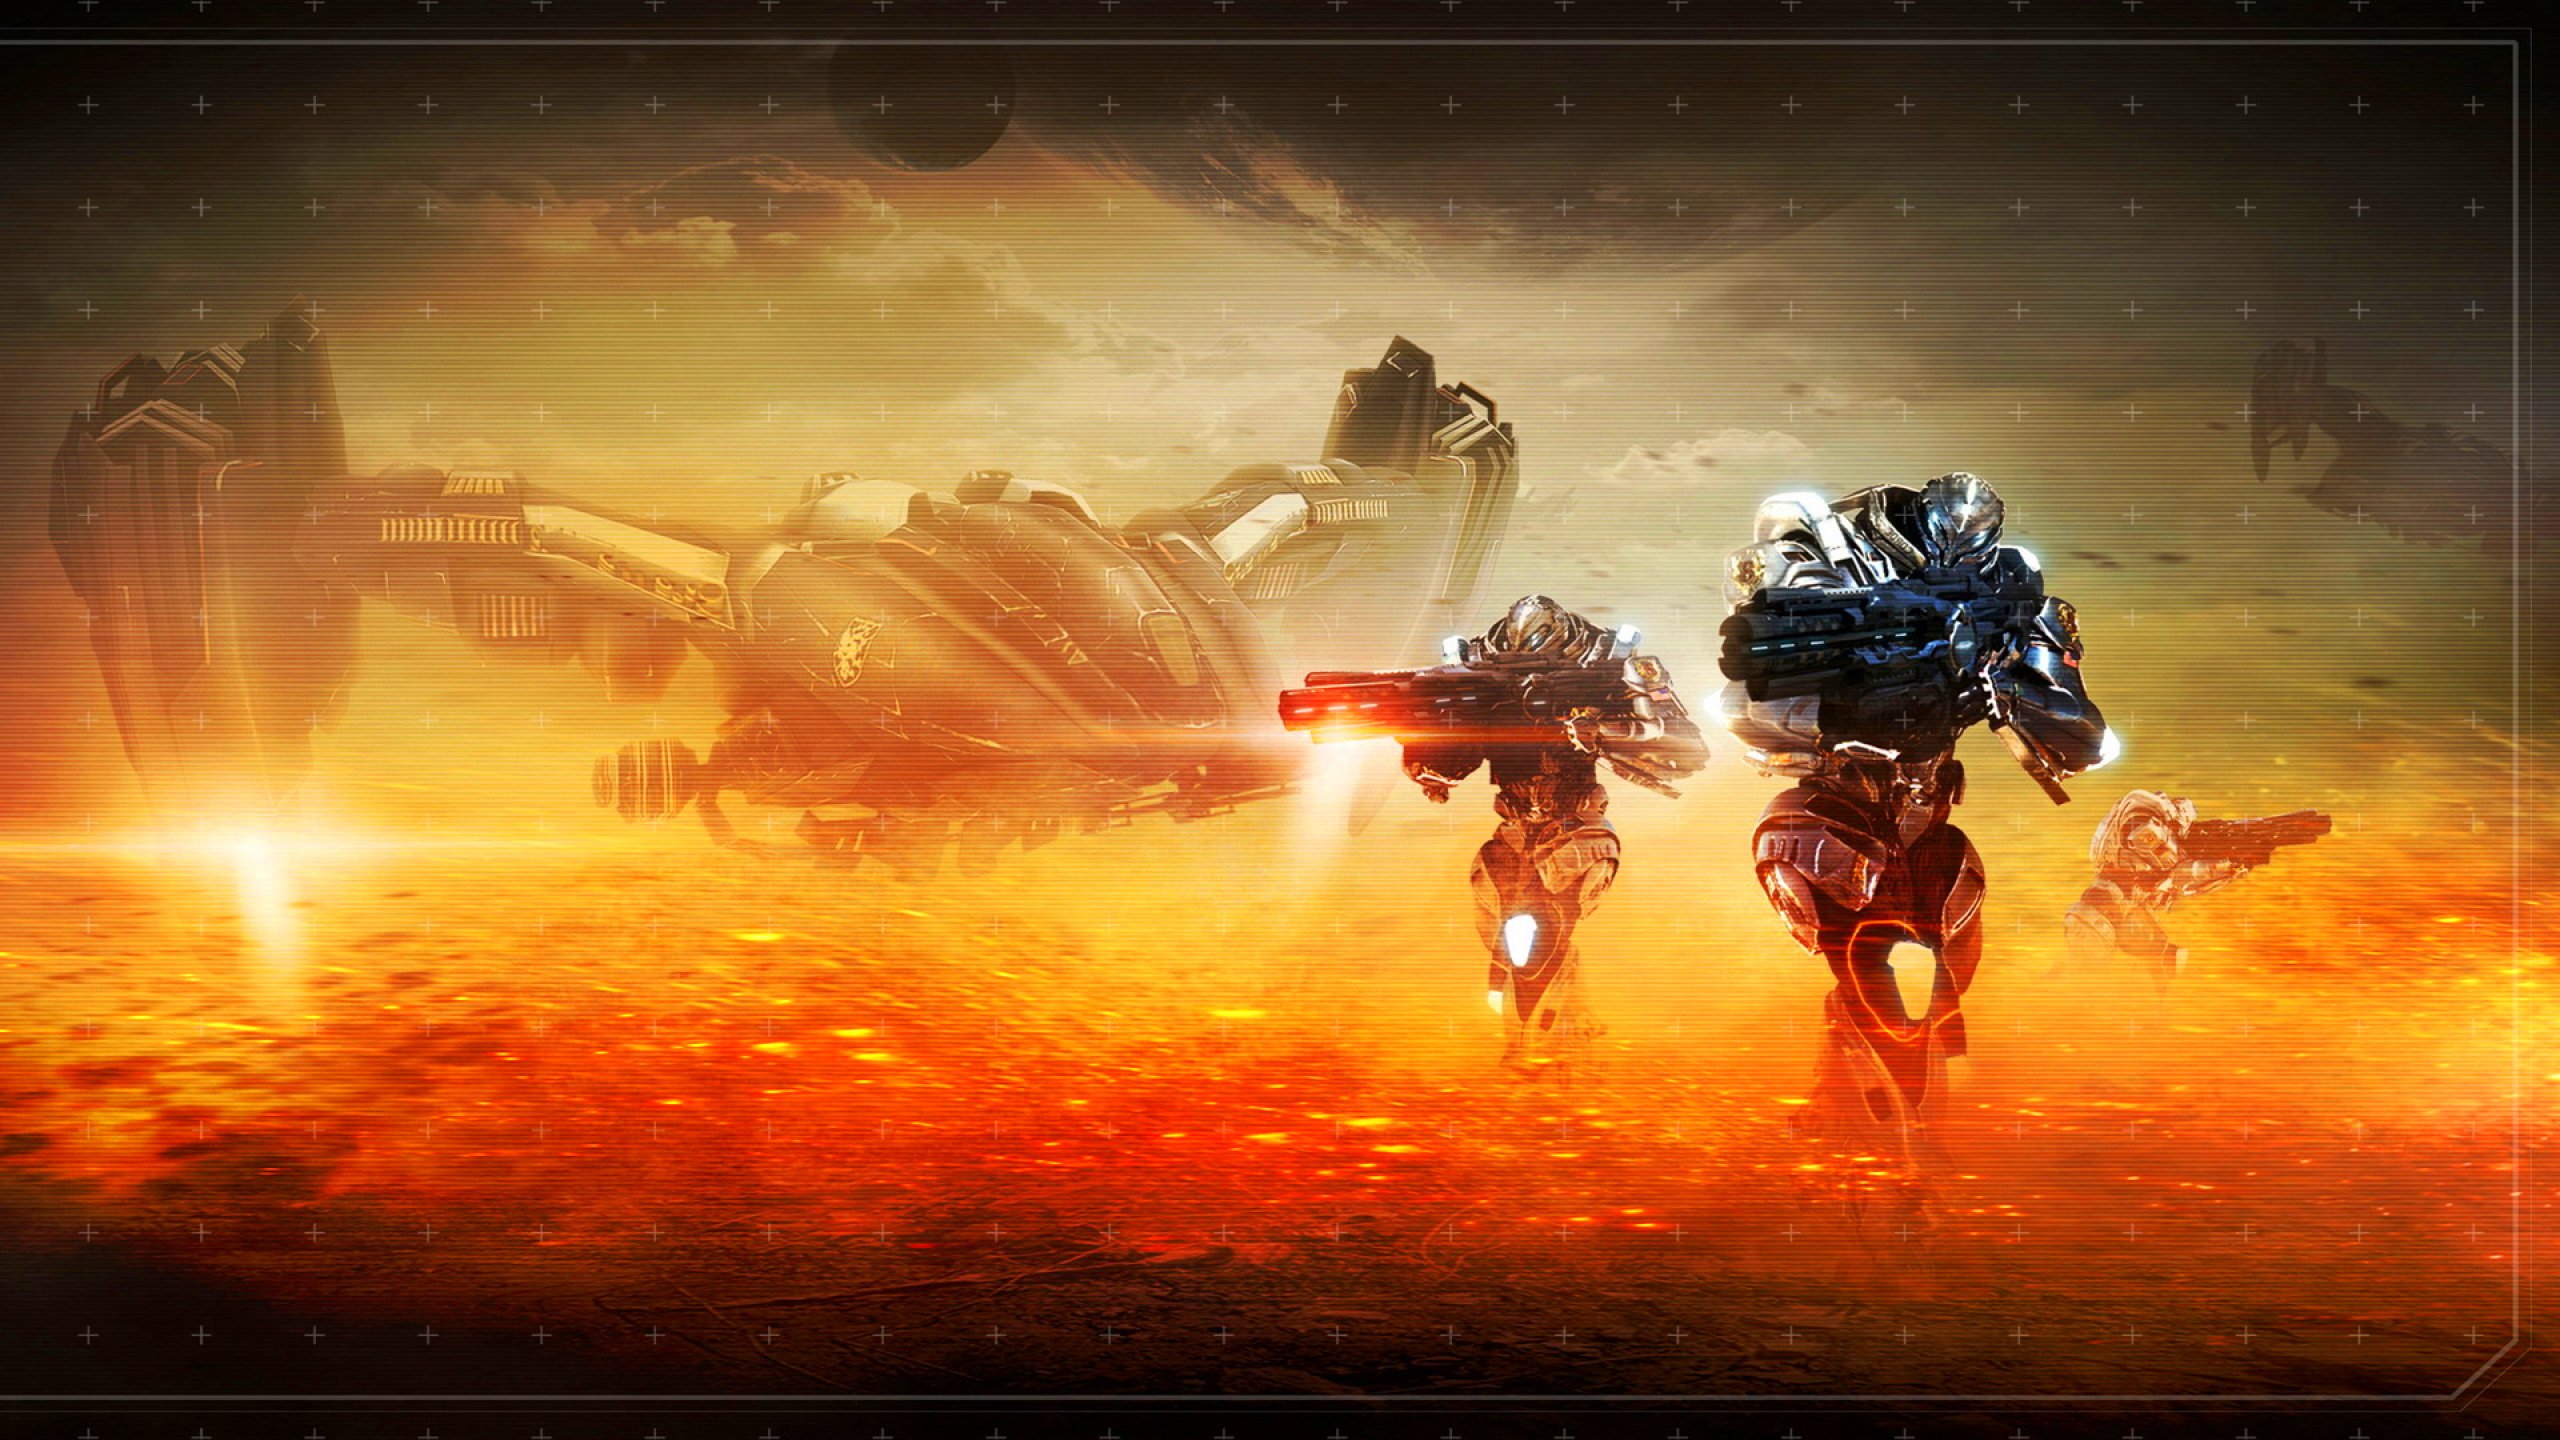 section, 8, Action, Fighting, Futuristic, Sci fi, Warrior, Shooter, 1sect8, Fps, Armor, Suit Wallpaper